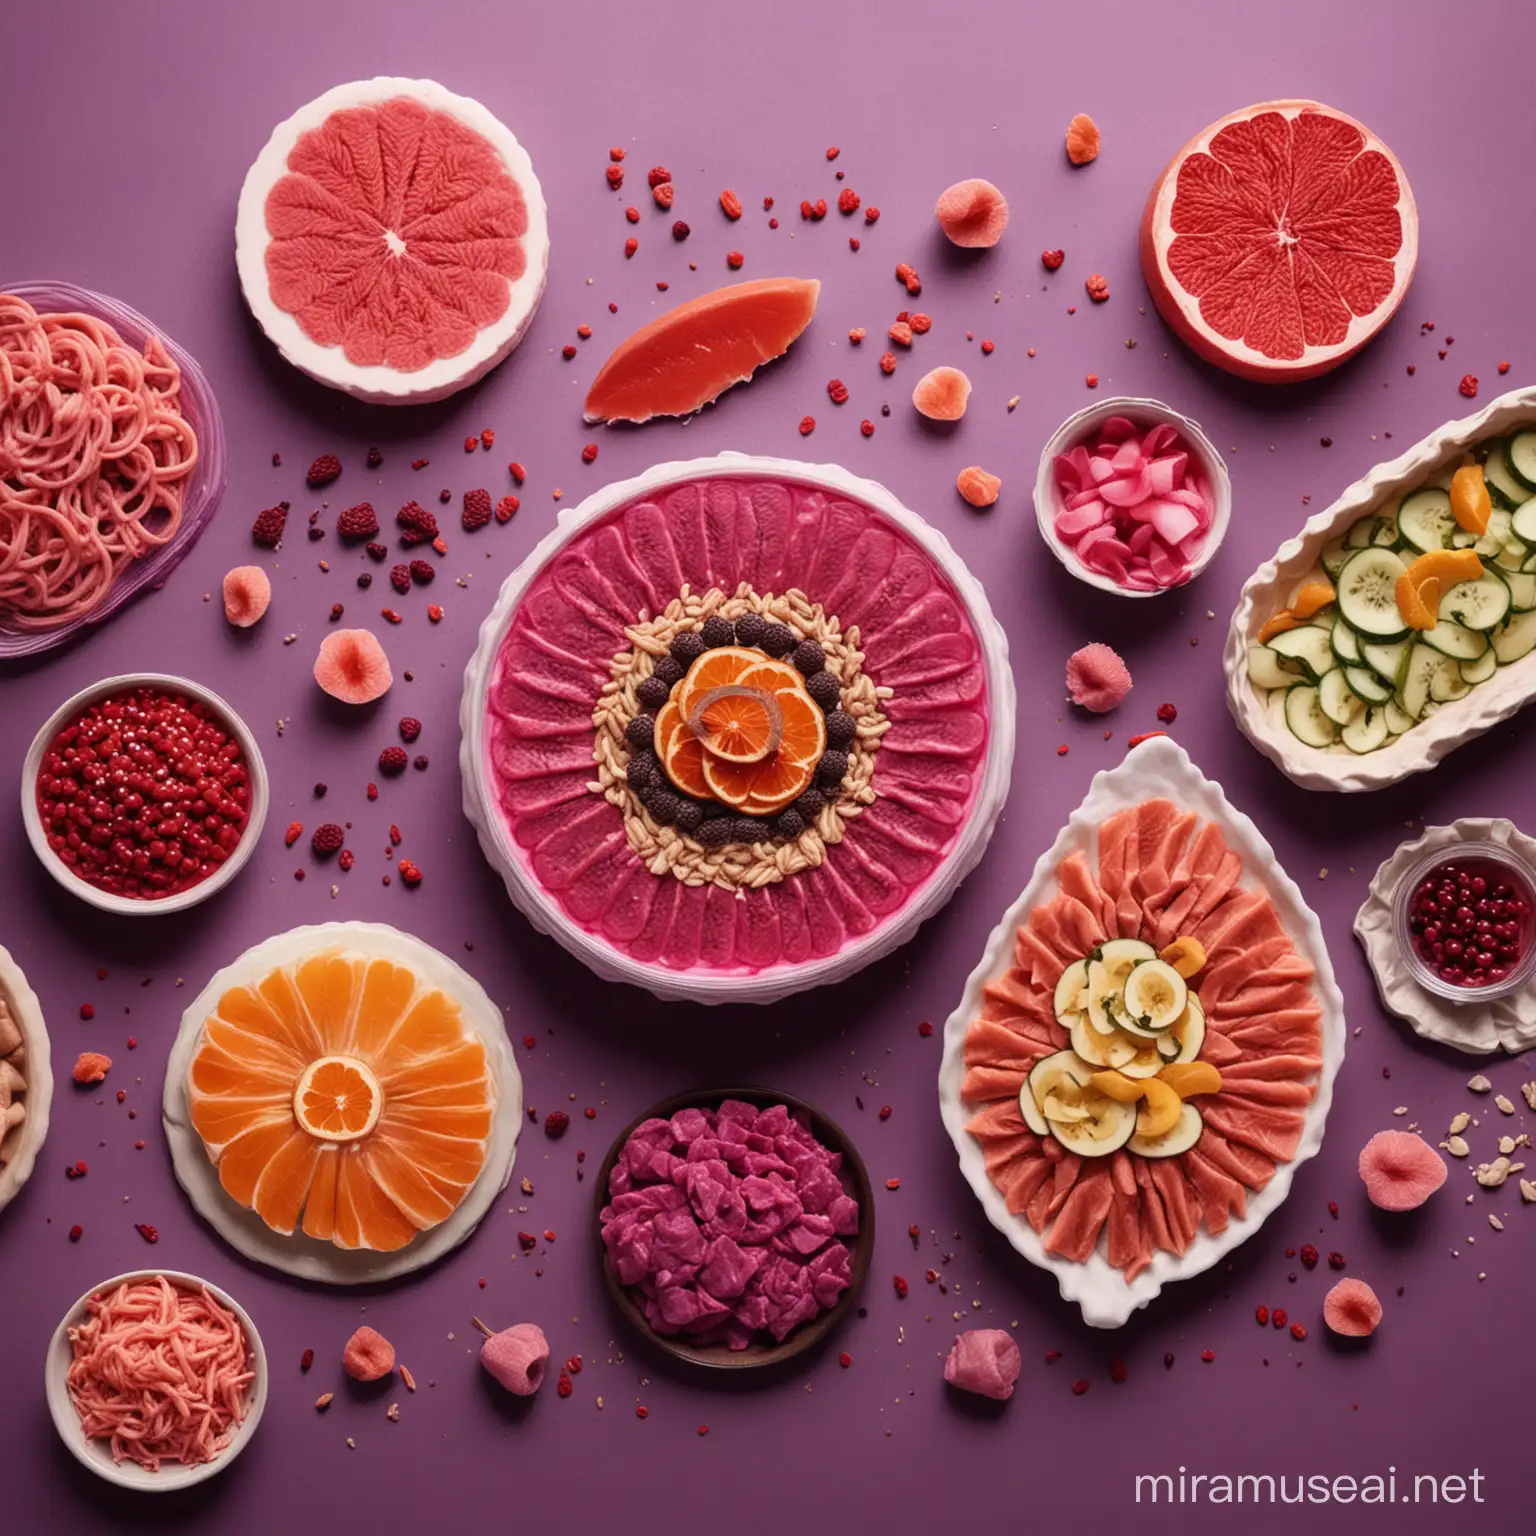 Vibrant Fermented Food Art Colorful and Creative Culinary Display